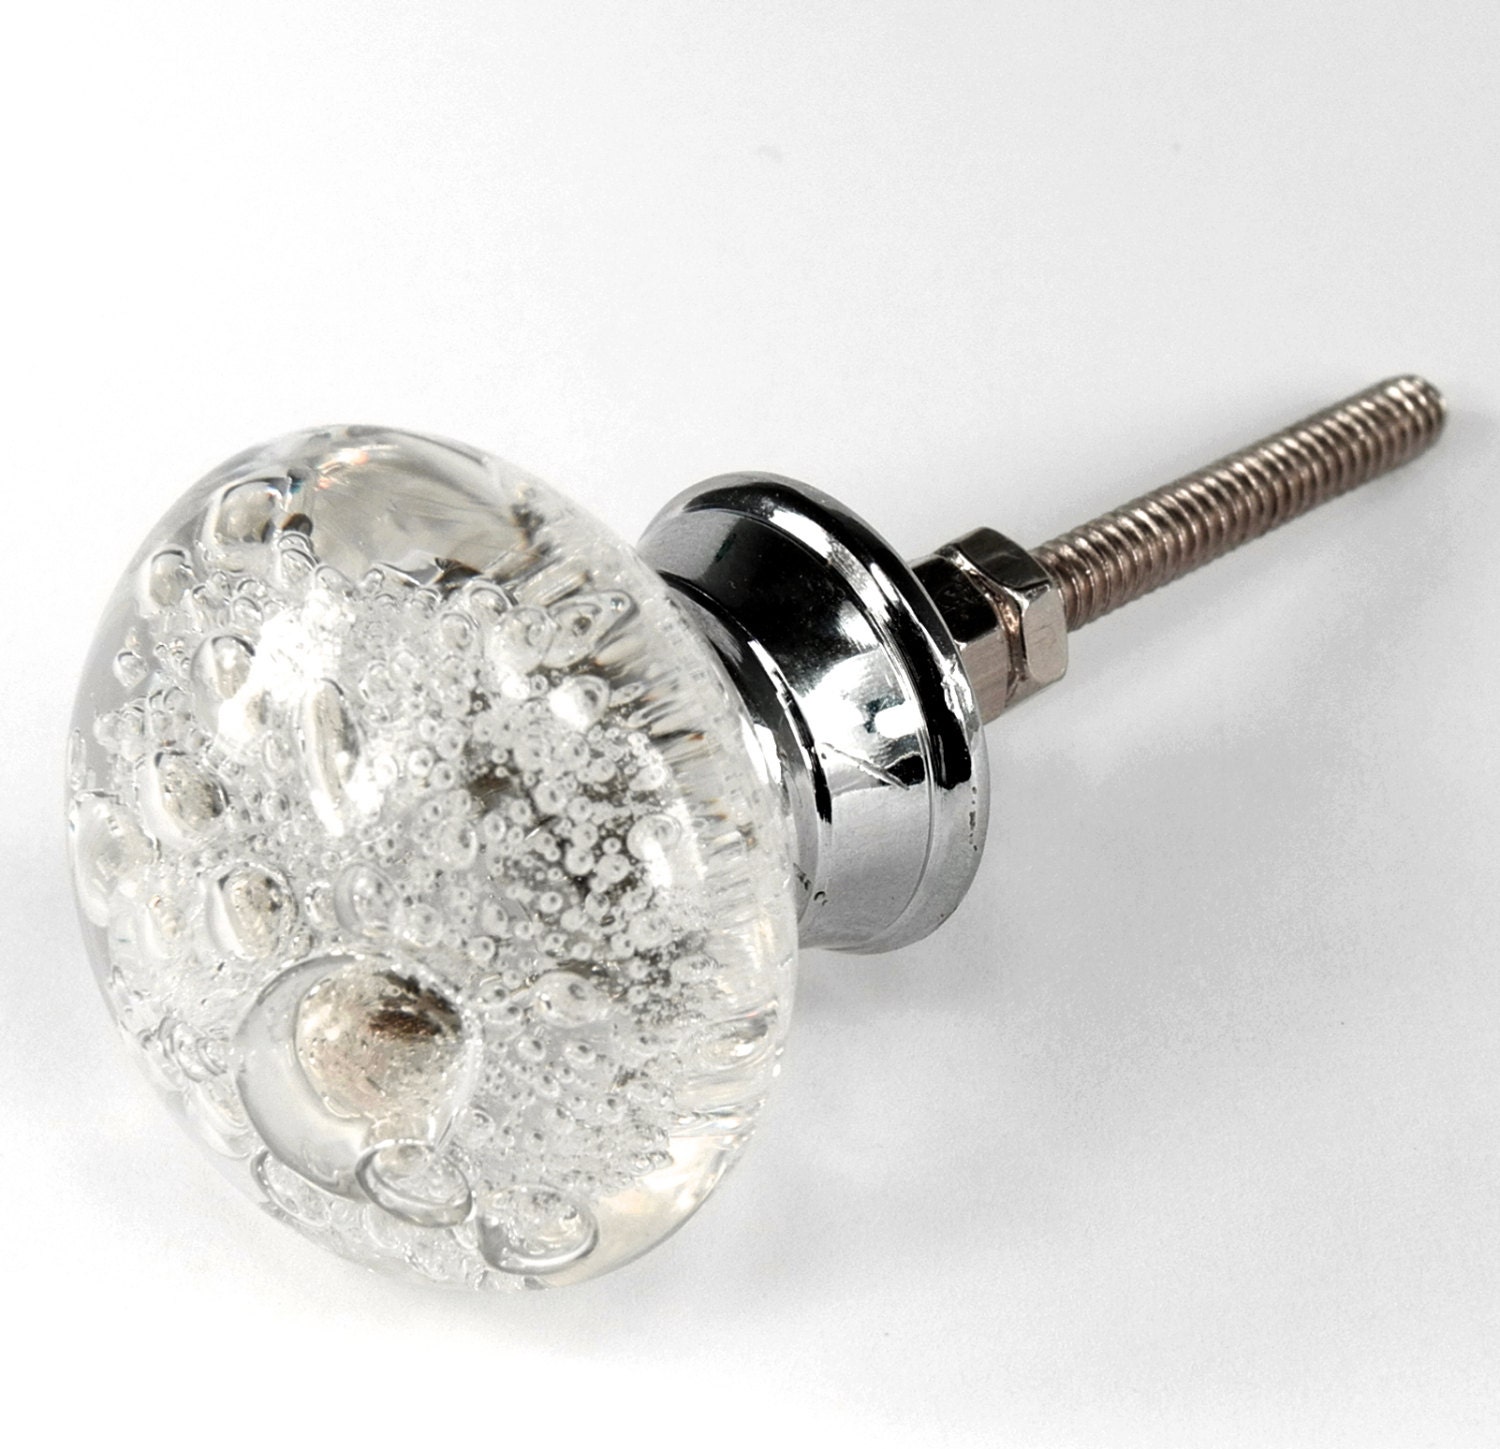 Set/8 Bubble Glass Cabinet Knobs Kitchen Drawer Pulls